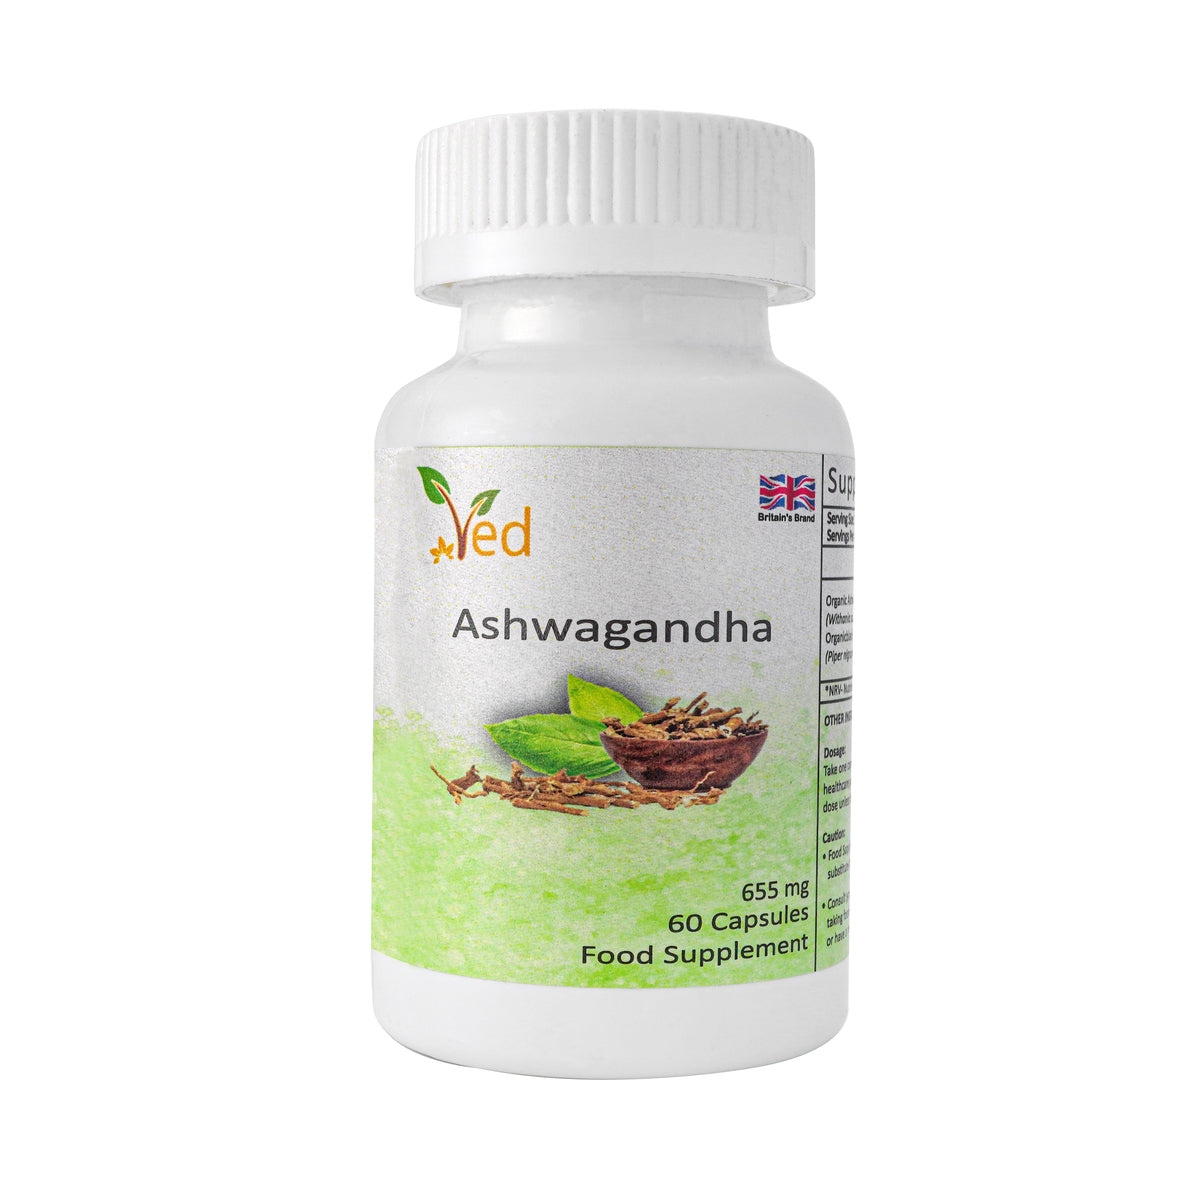 Ved Ashwagandha, 2 Month Supply, Non-GMO, Gluten-Free Supplement, 100% Ashwagandha Powder & Extract, 650 mg, with 5 mg Black Pepper 60 Capsule.